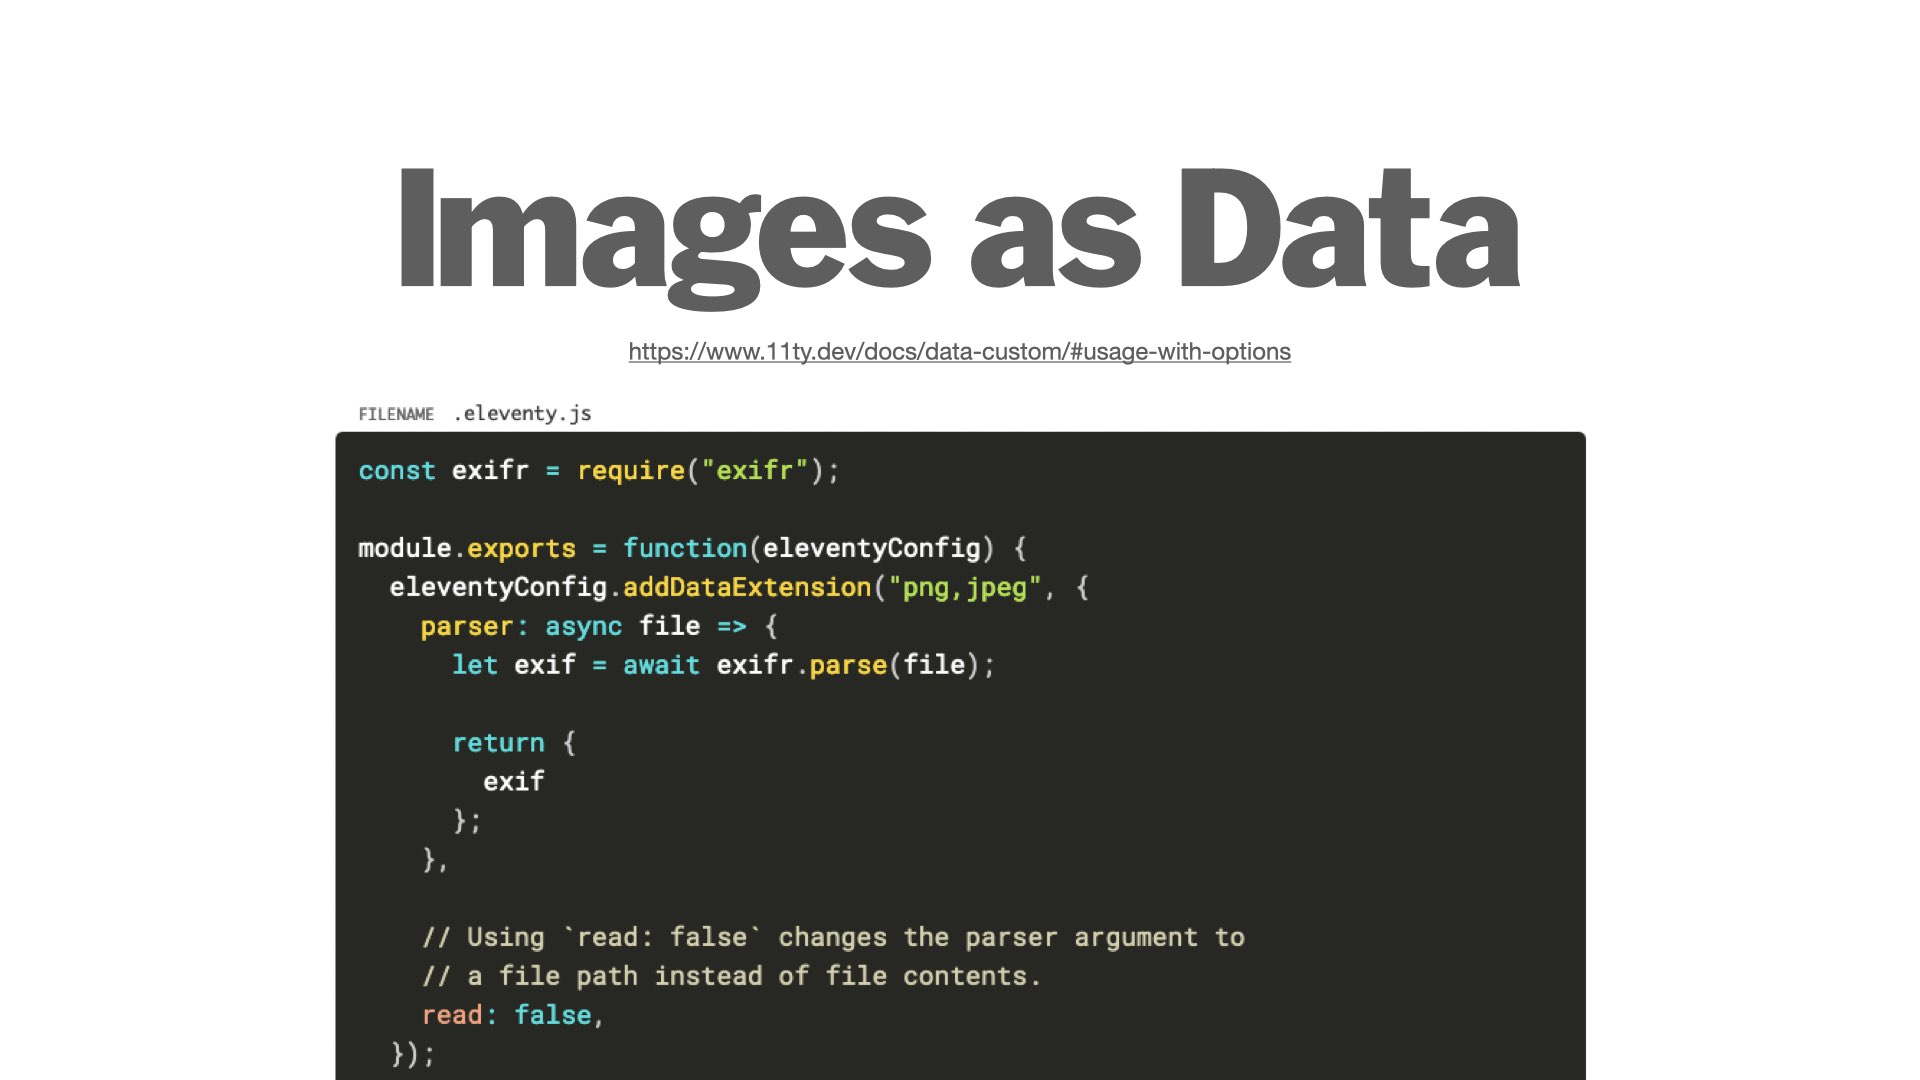 Images as Data: addDataExtension('png,jpeg')